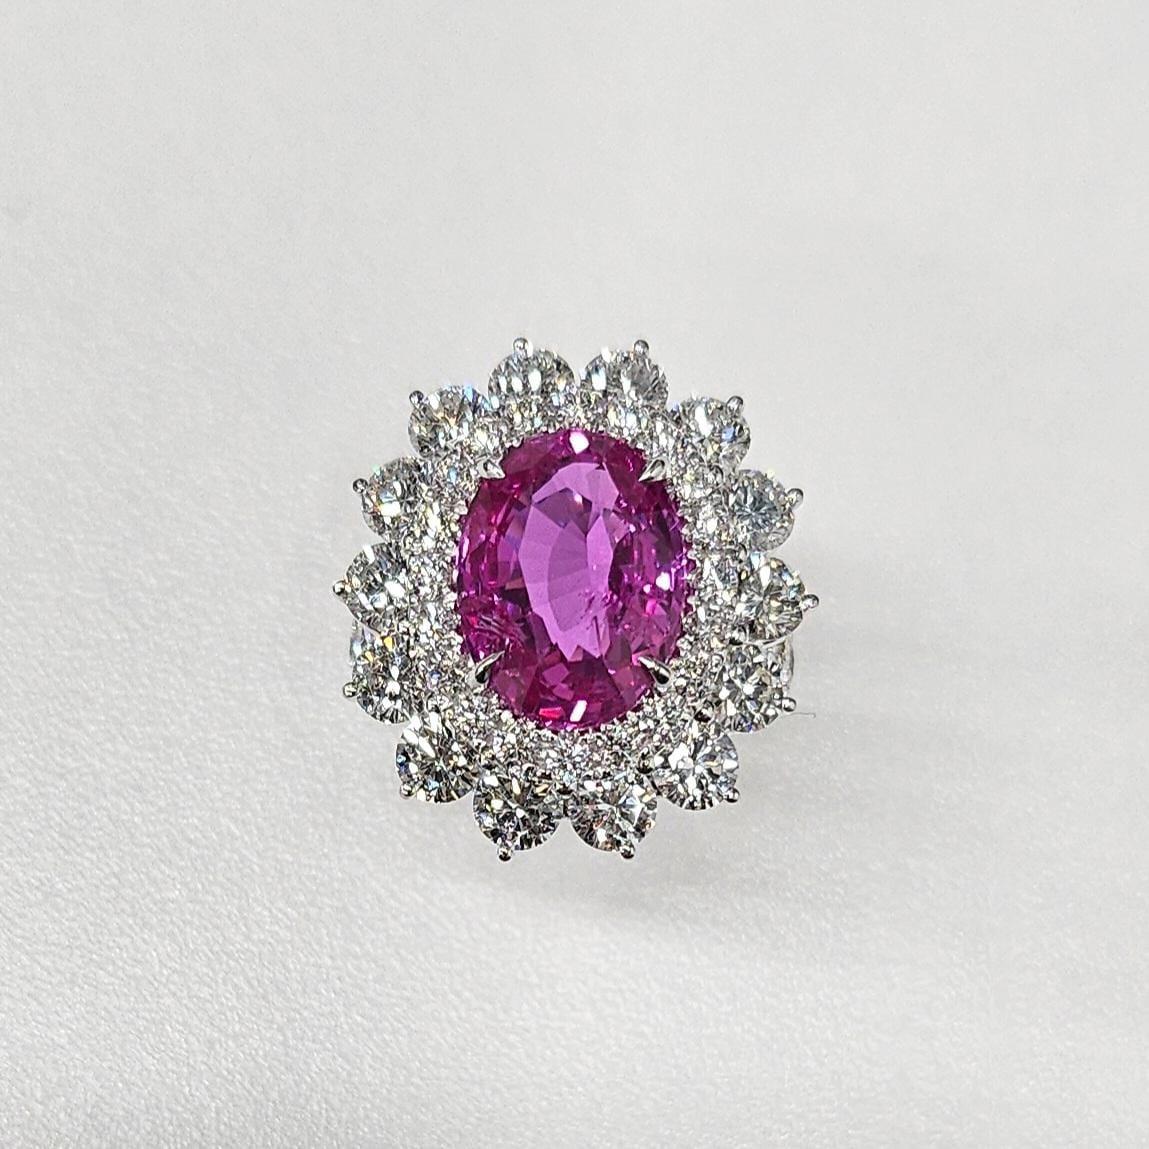 GRS Certified 5.81 Ct Pink Sapphire & 3.59 Ct Diamond Ring in 18K White Gold For Sale 3